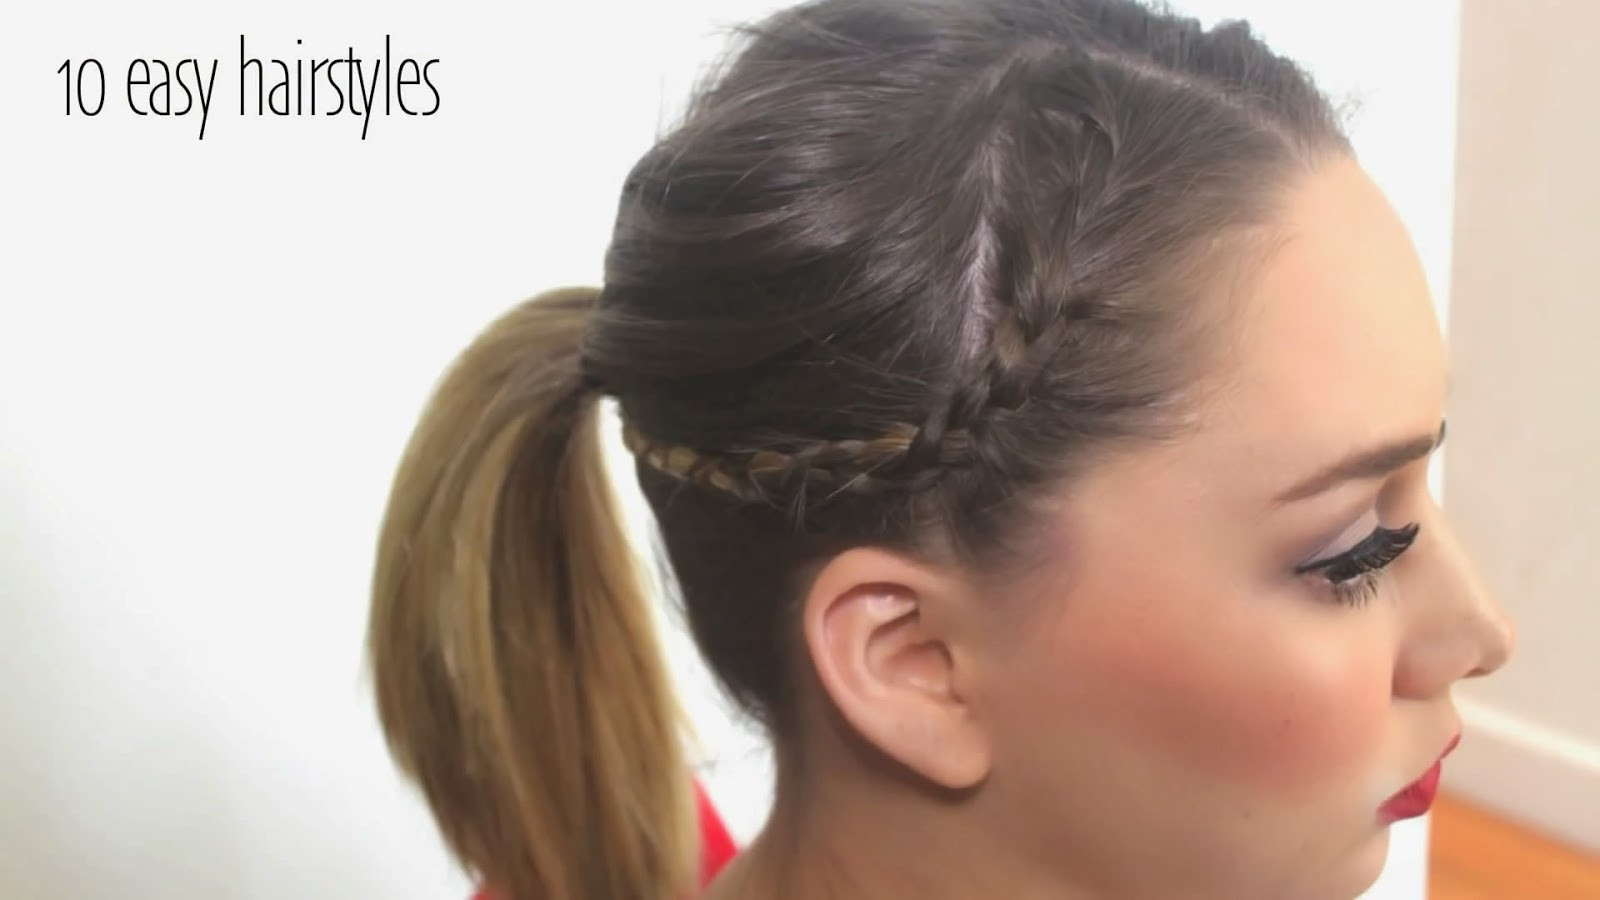 10 Easy Hairstyles
 StyleVia Top 10 Easy Hairstyles Can Set in 5 Minutes